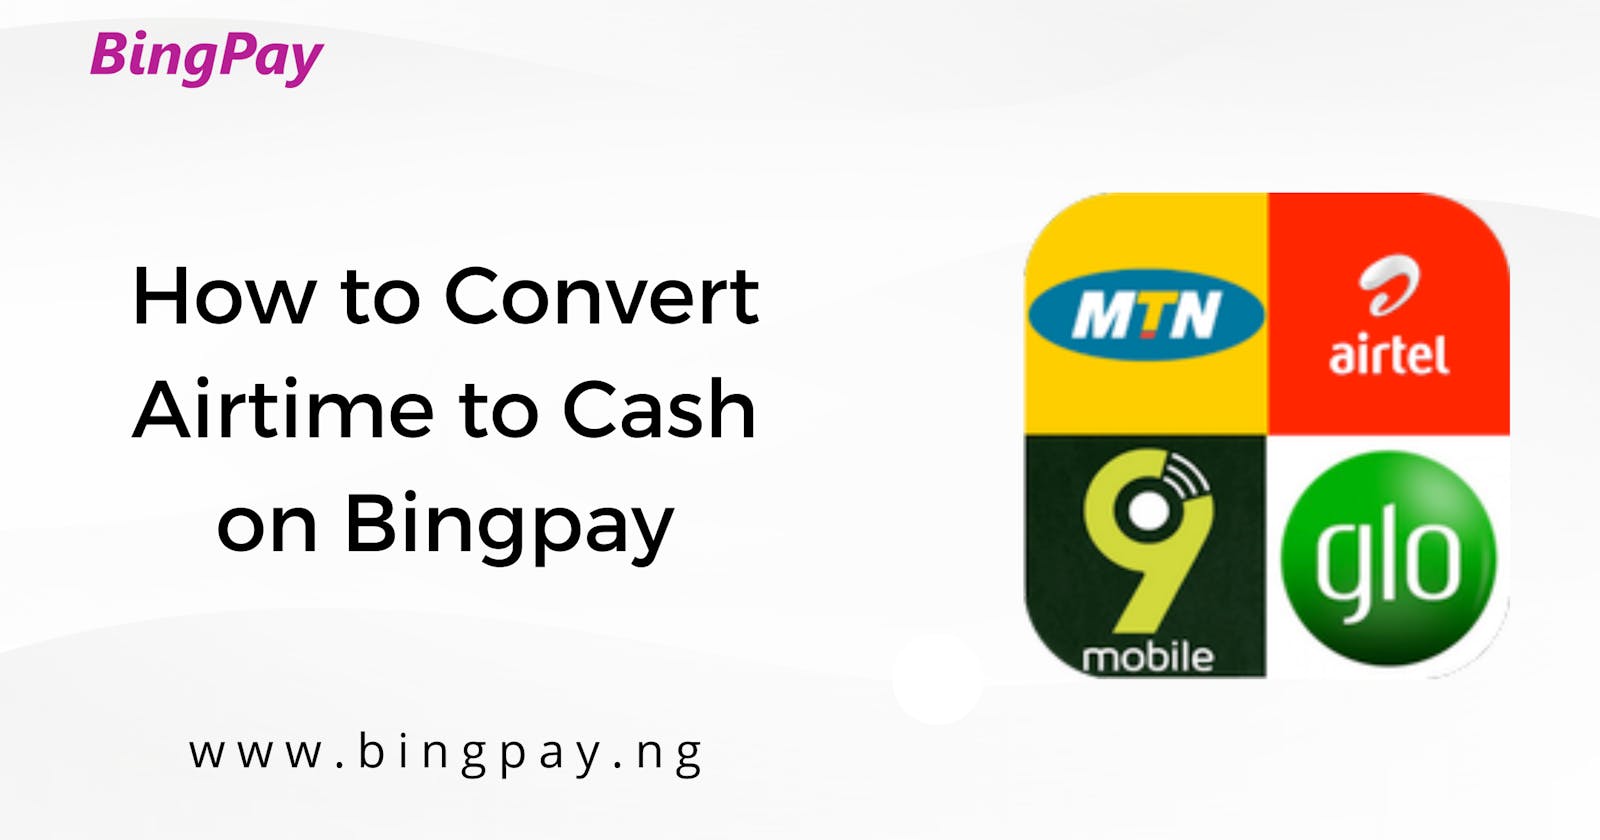 How to Convert Airtime to Cash on Bingpay